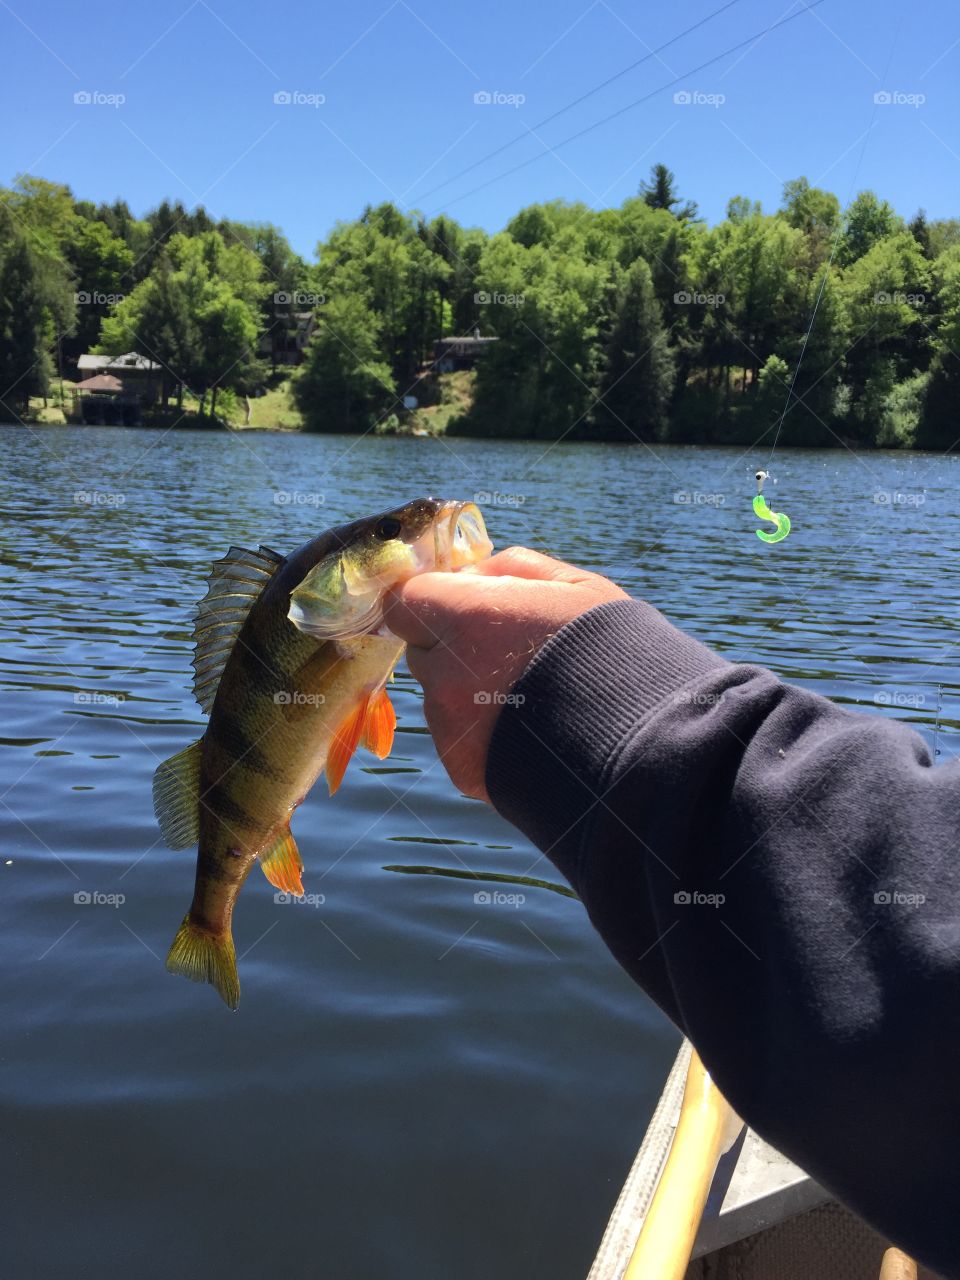 Water is great for fishing!